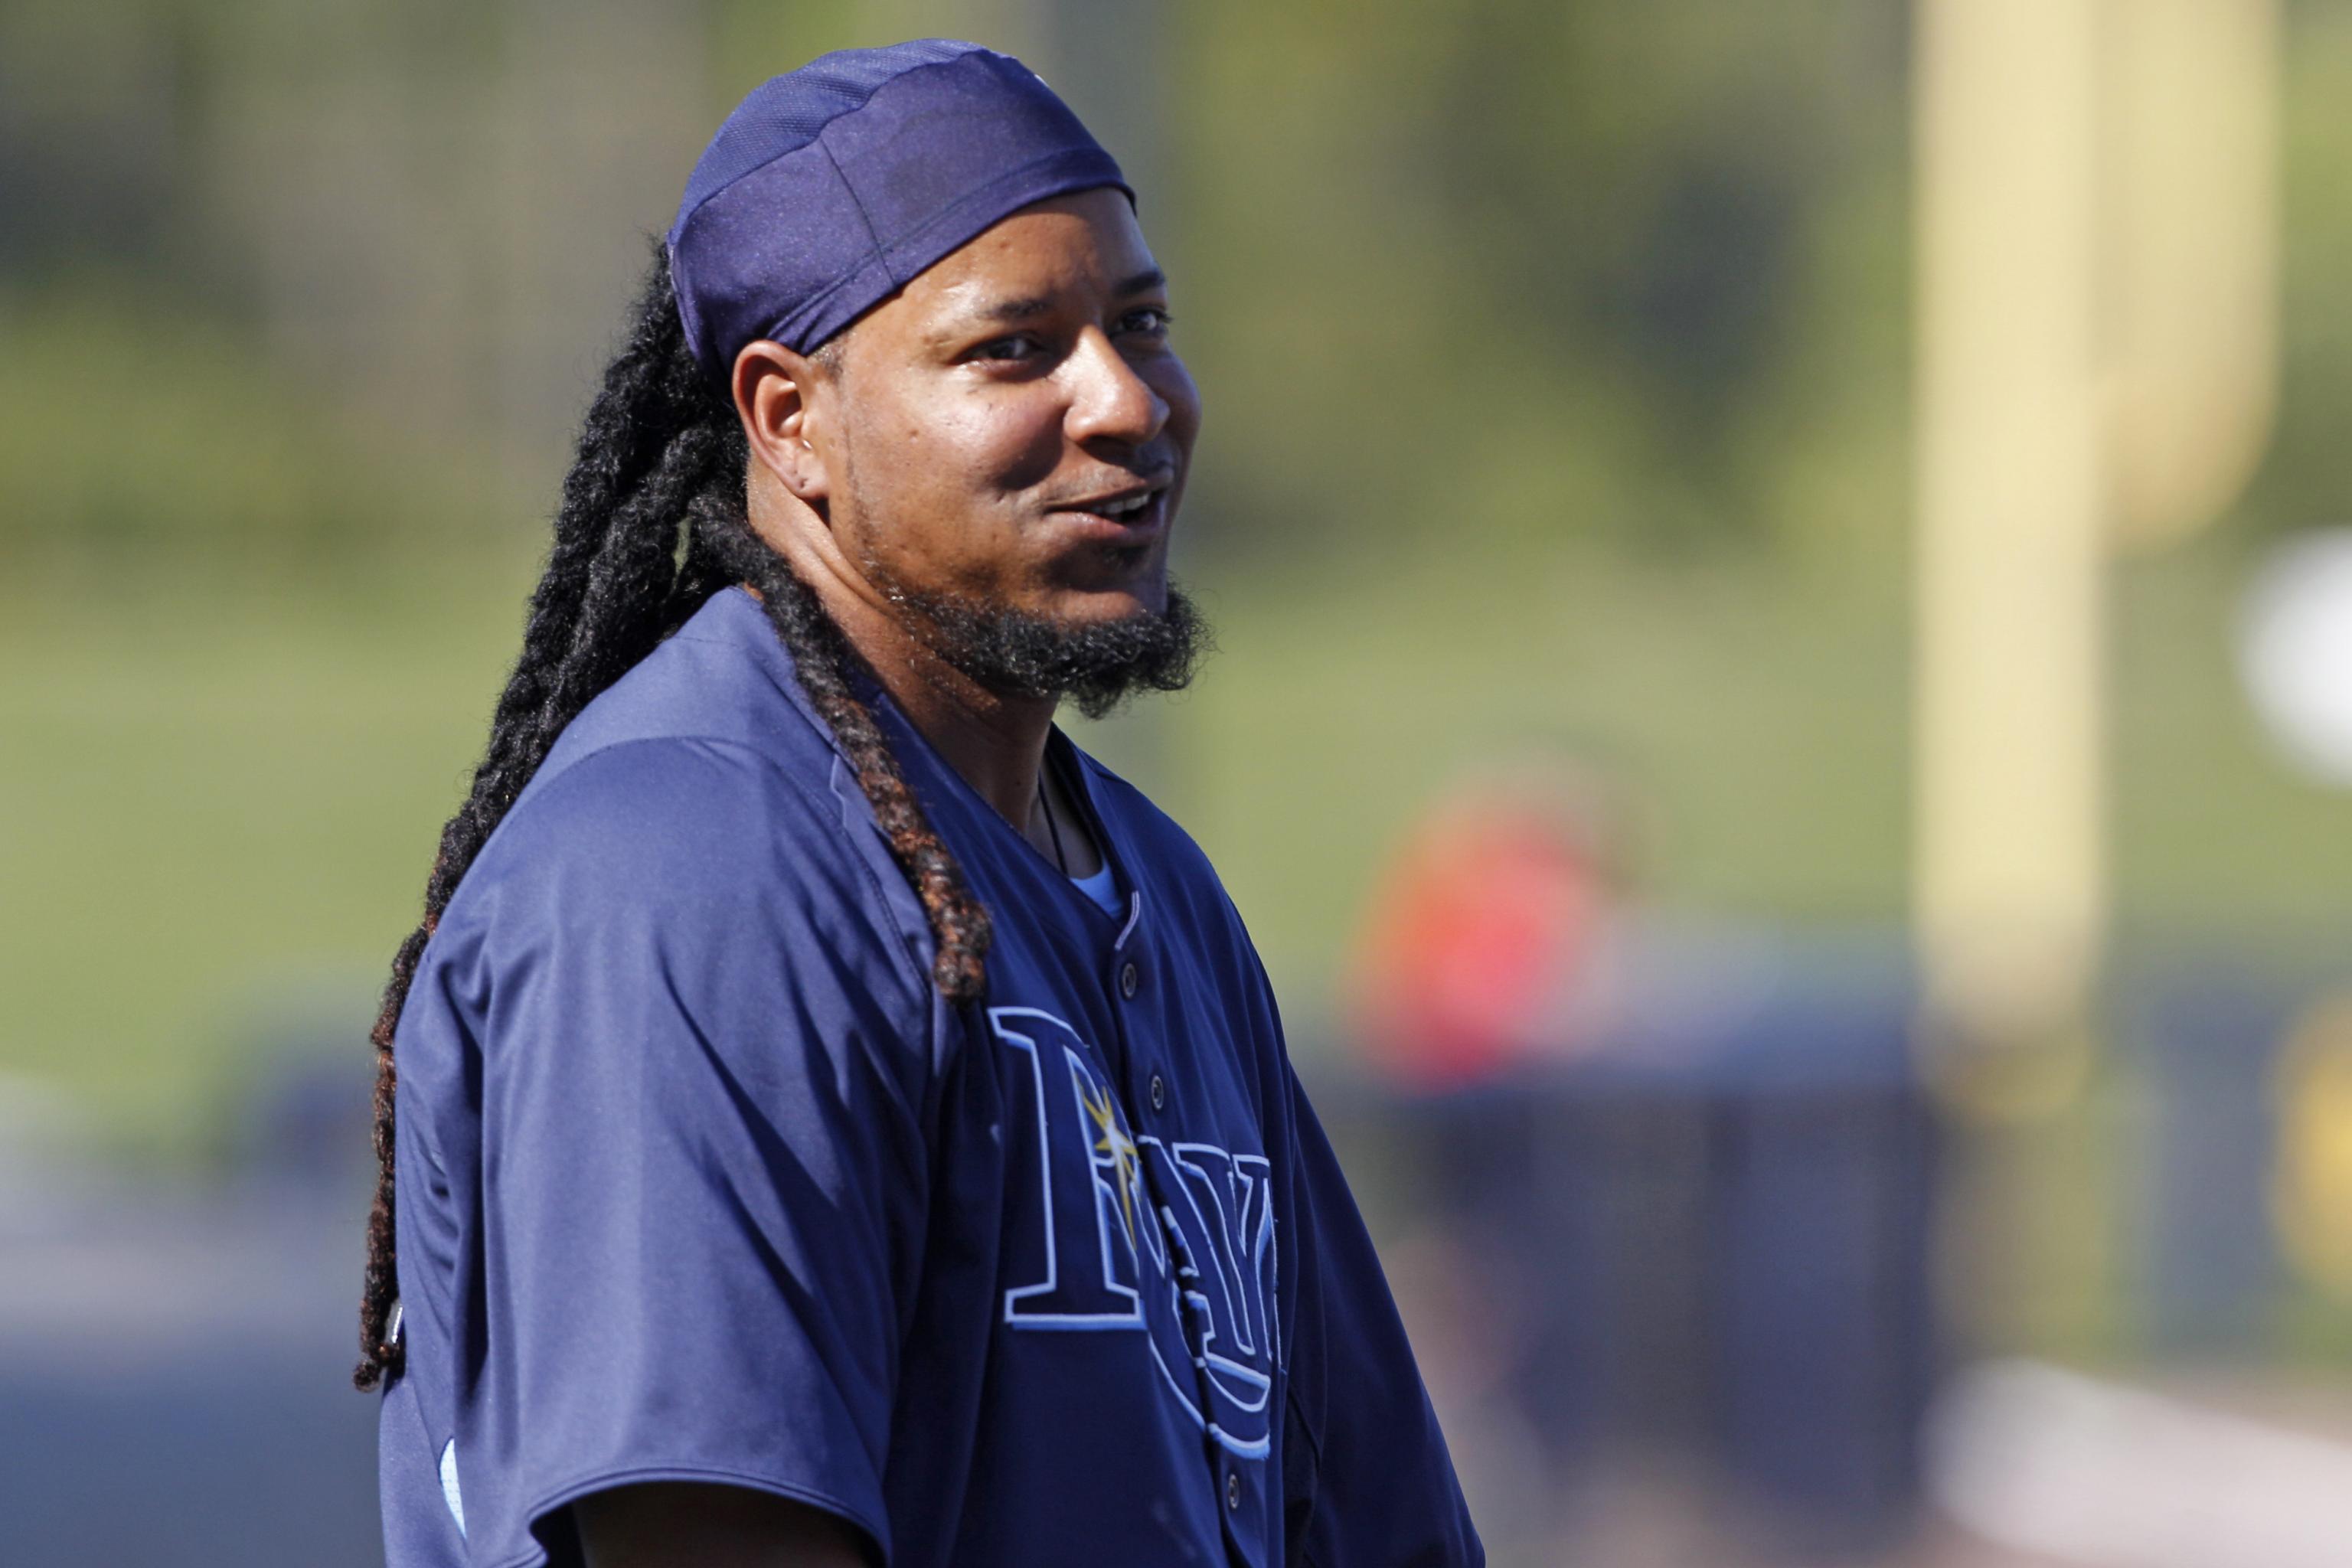 Manny's Back: Cubs Announce Manny Ramirez as Hitting Consultant